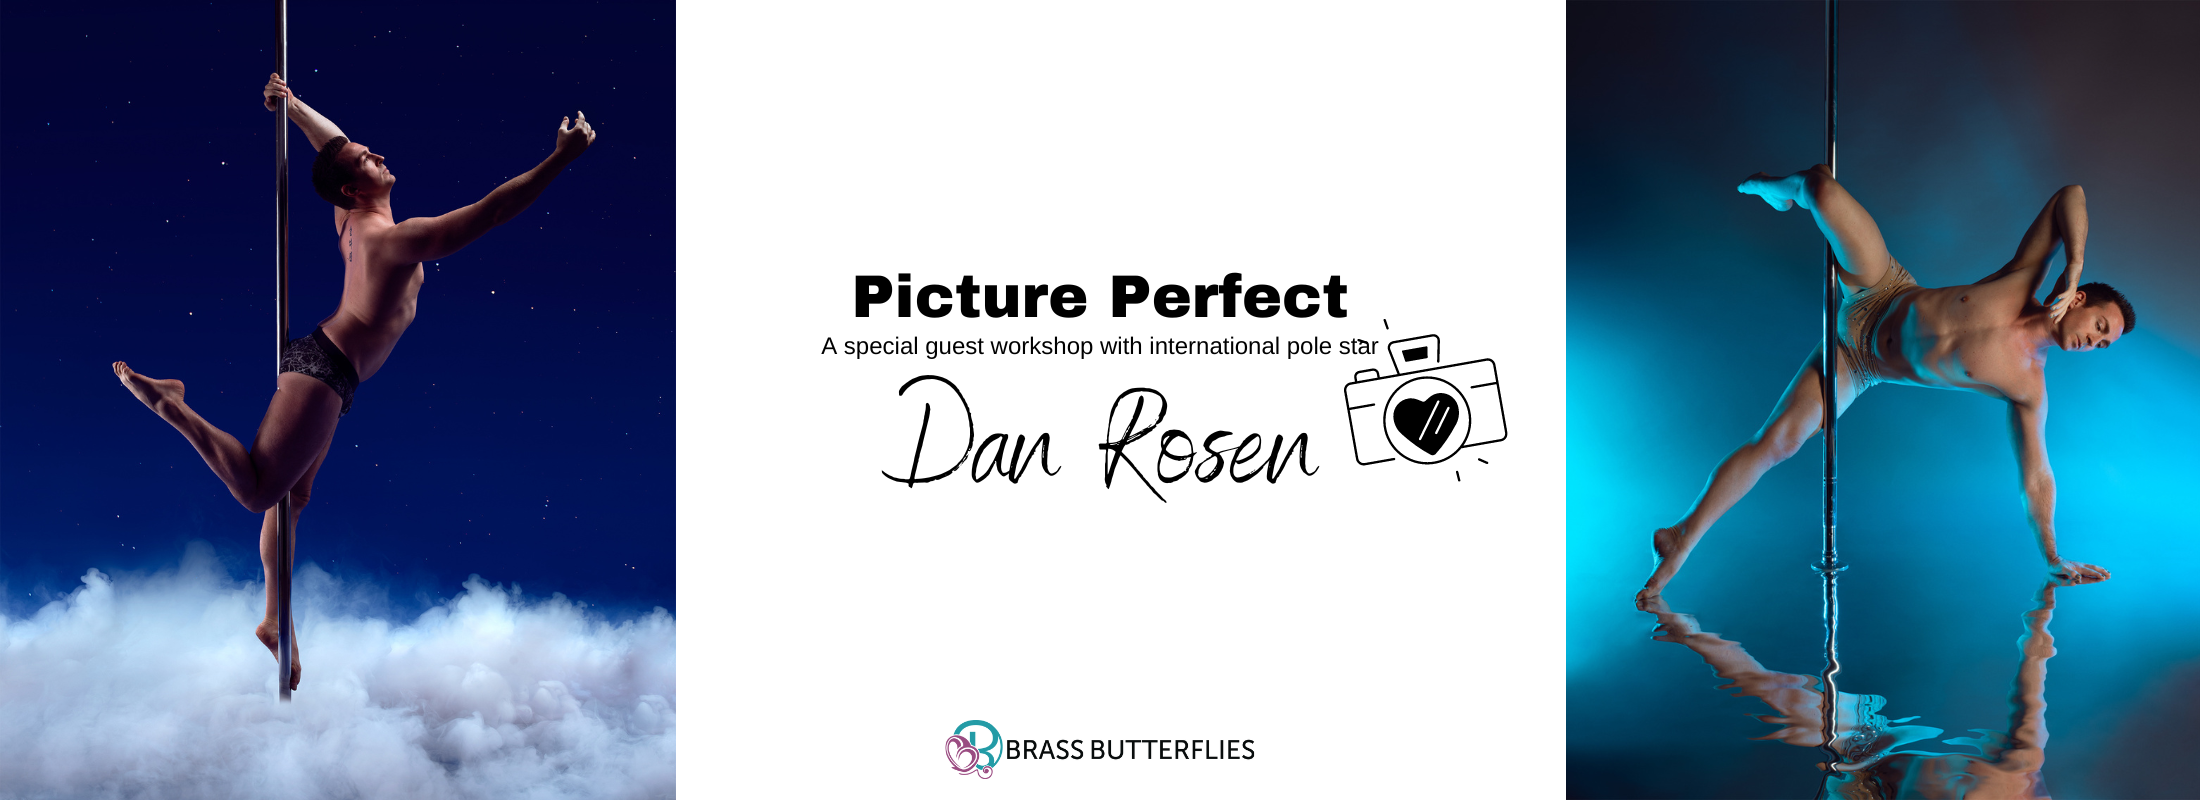 Picture Perfect Workshop with Dan Rosen